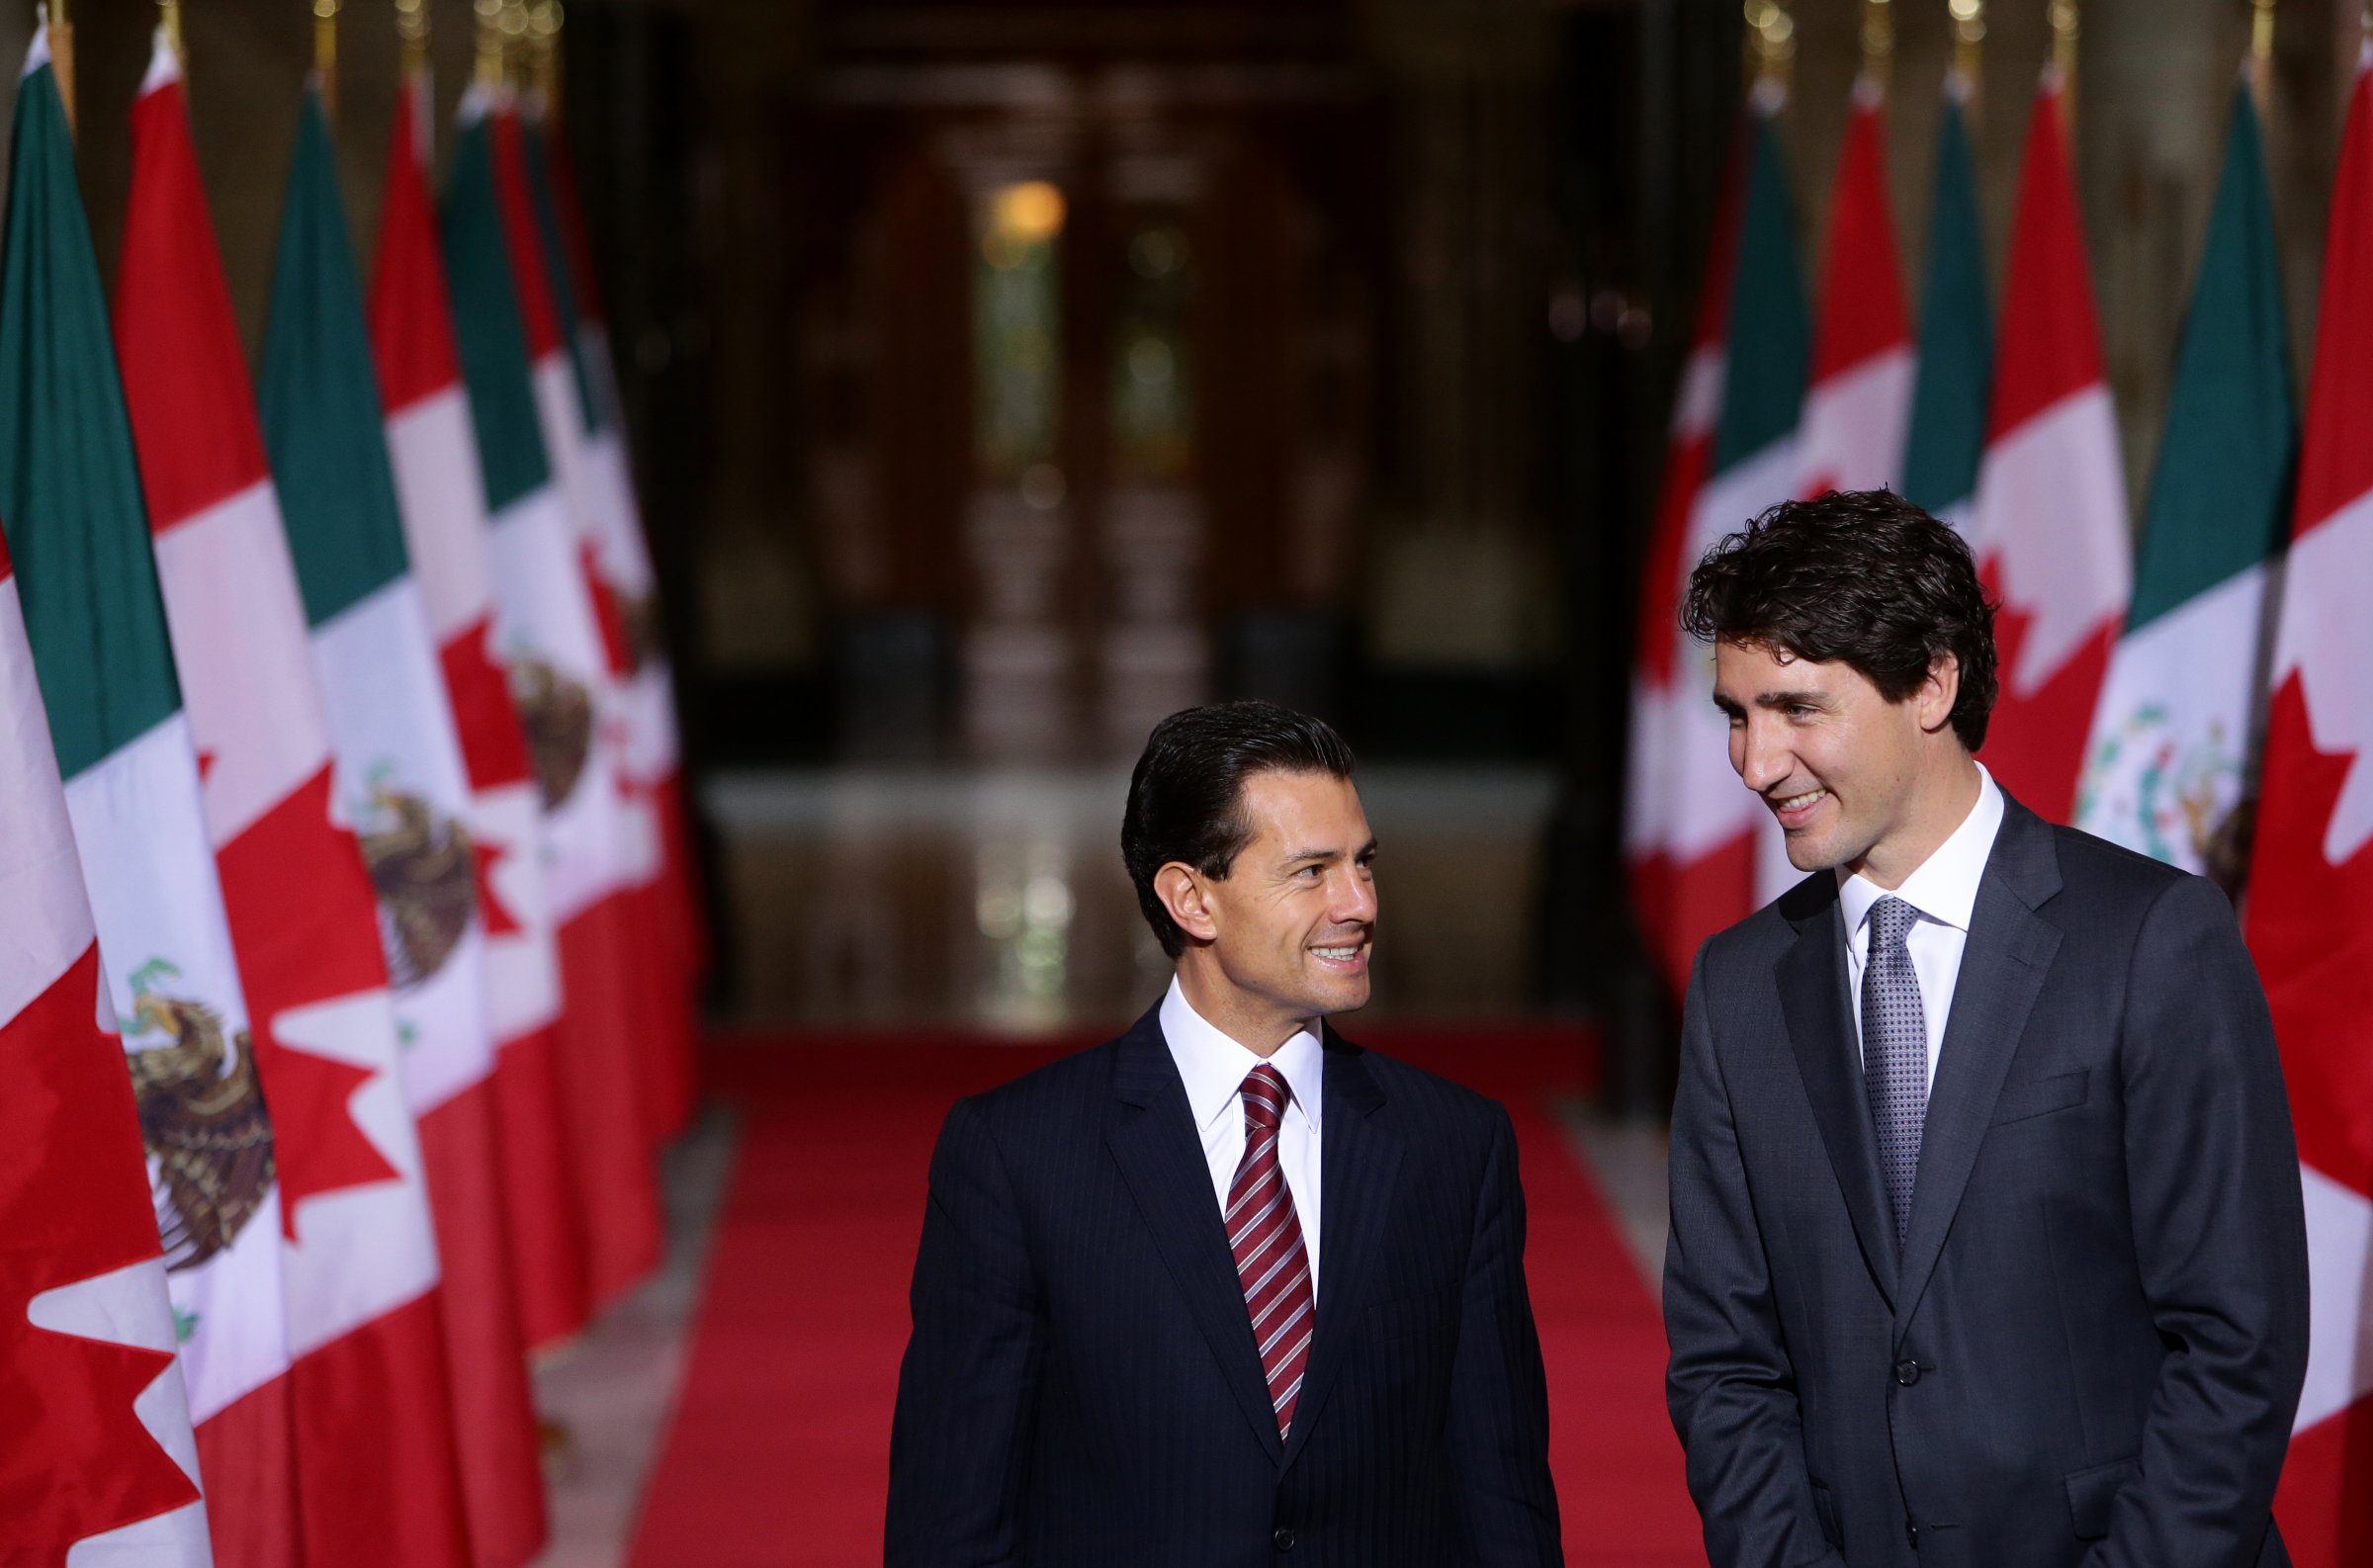 Justin Trudeau, Canada's prime minister, right, smiles with Enrique Pena Nieto, Mexico's president, in the Hall of Honour at Parliament Hill ahead of the North American Leaders Summit (NALS) in Ottawa, Ontario, Canada, on June 28, 2016.